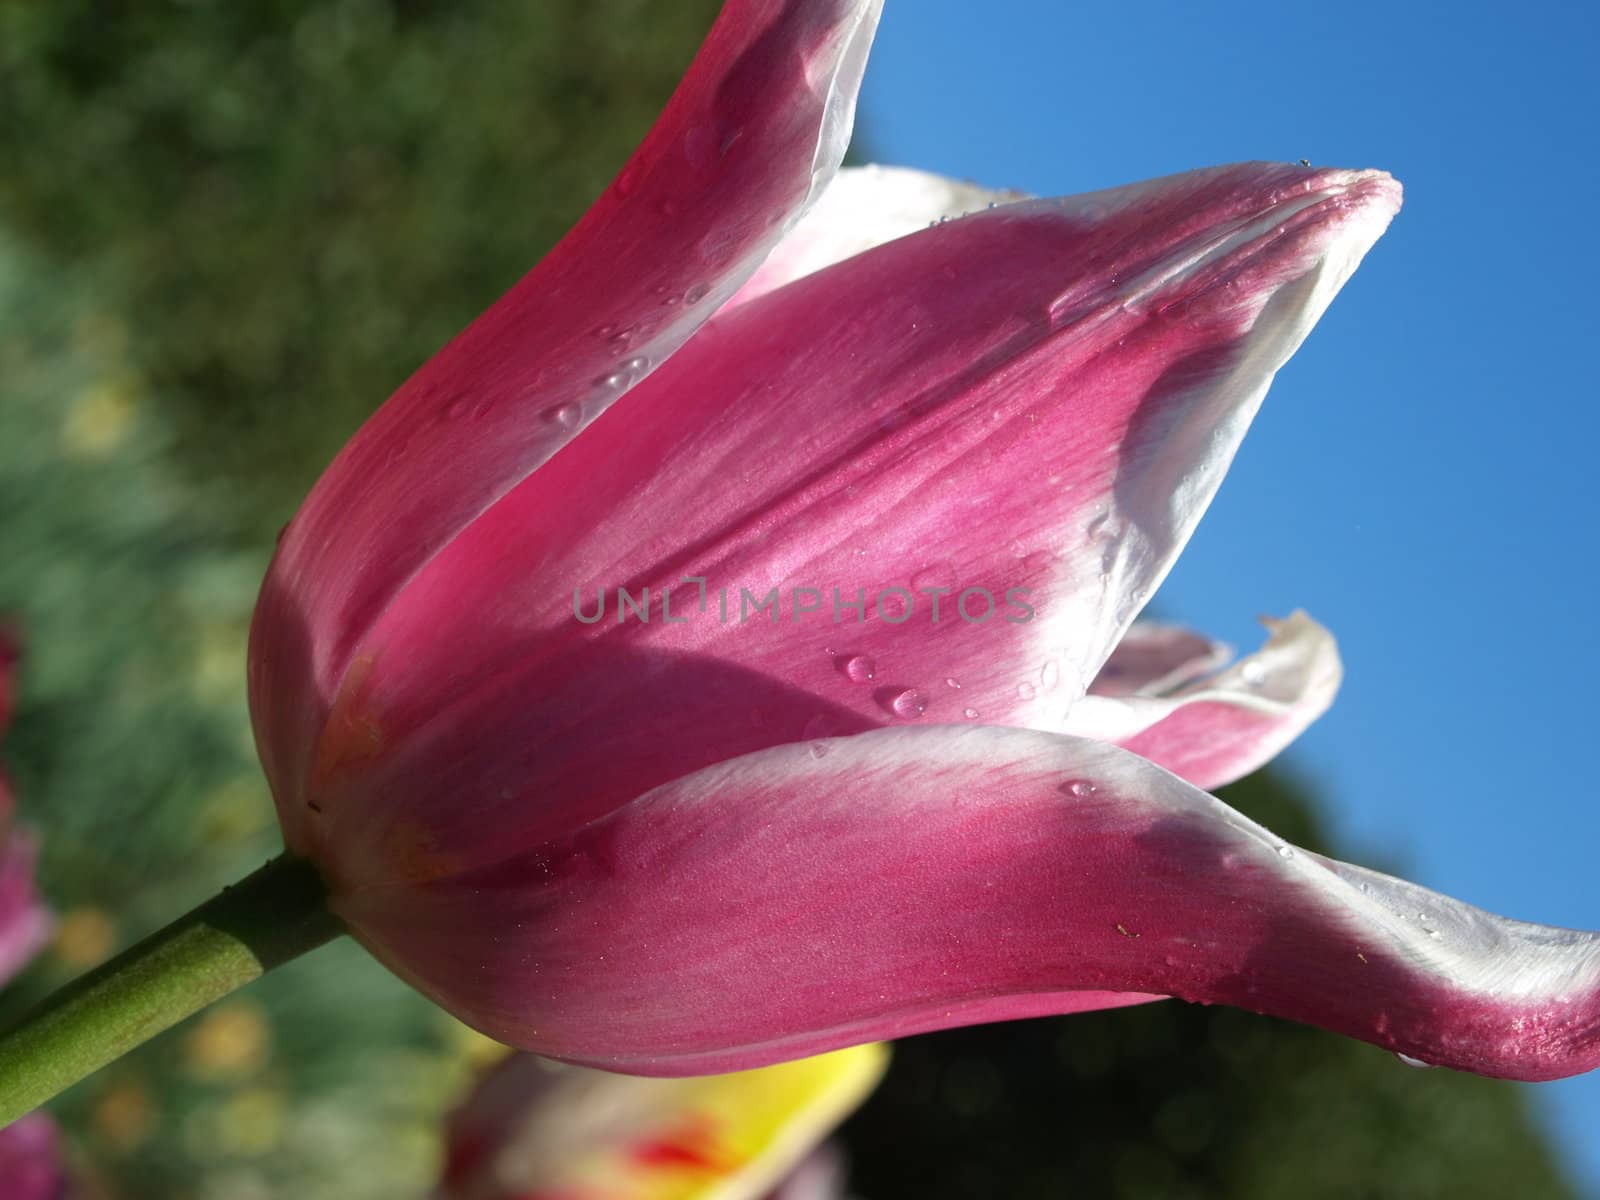 A purple tulip in the morning